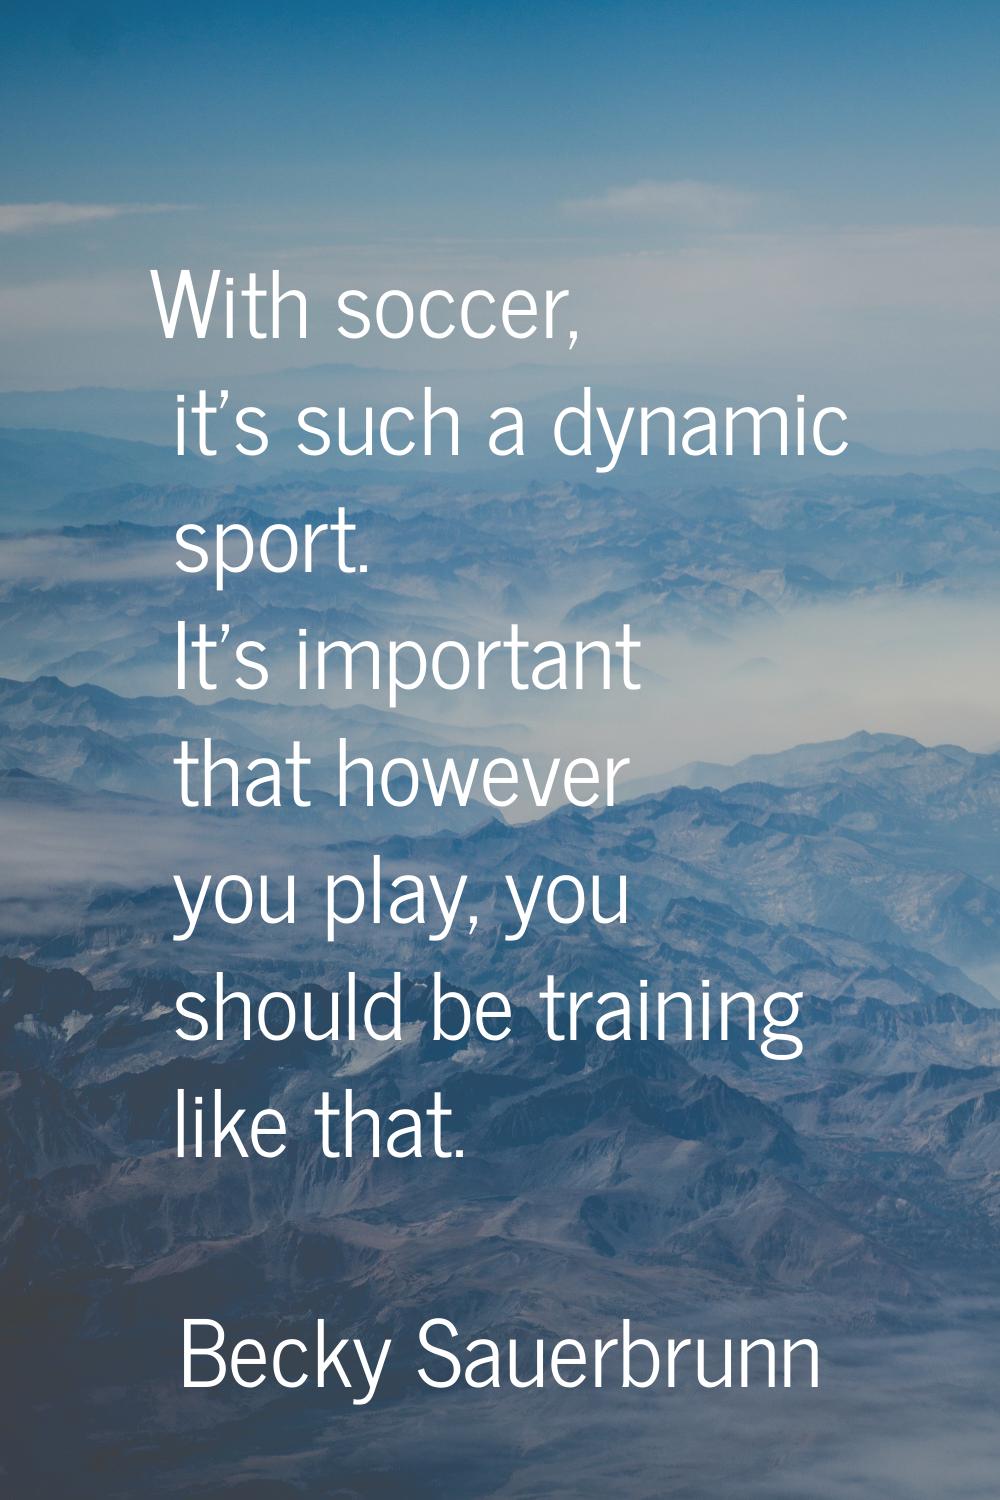 With soccer, it's such a dynamic sport. It's important that however you play, you should be trainin